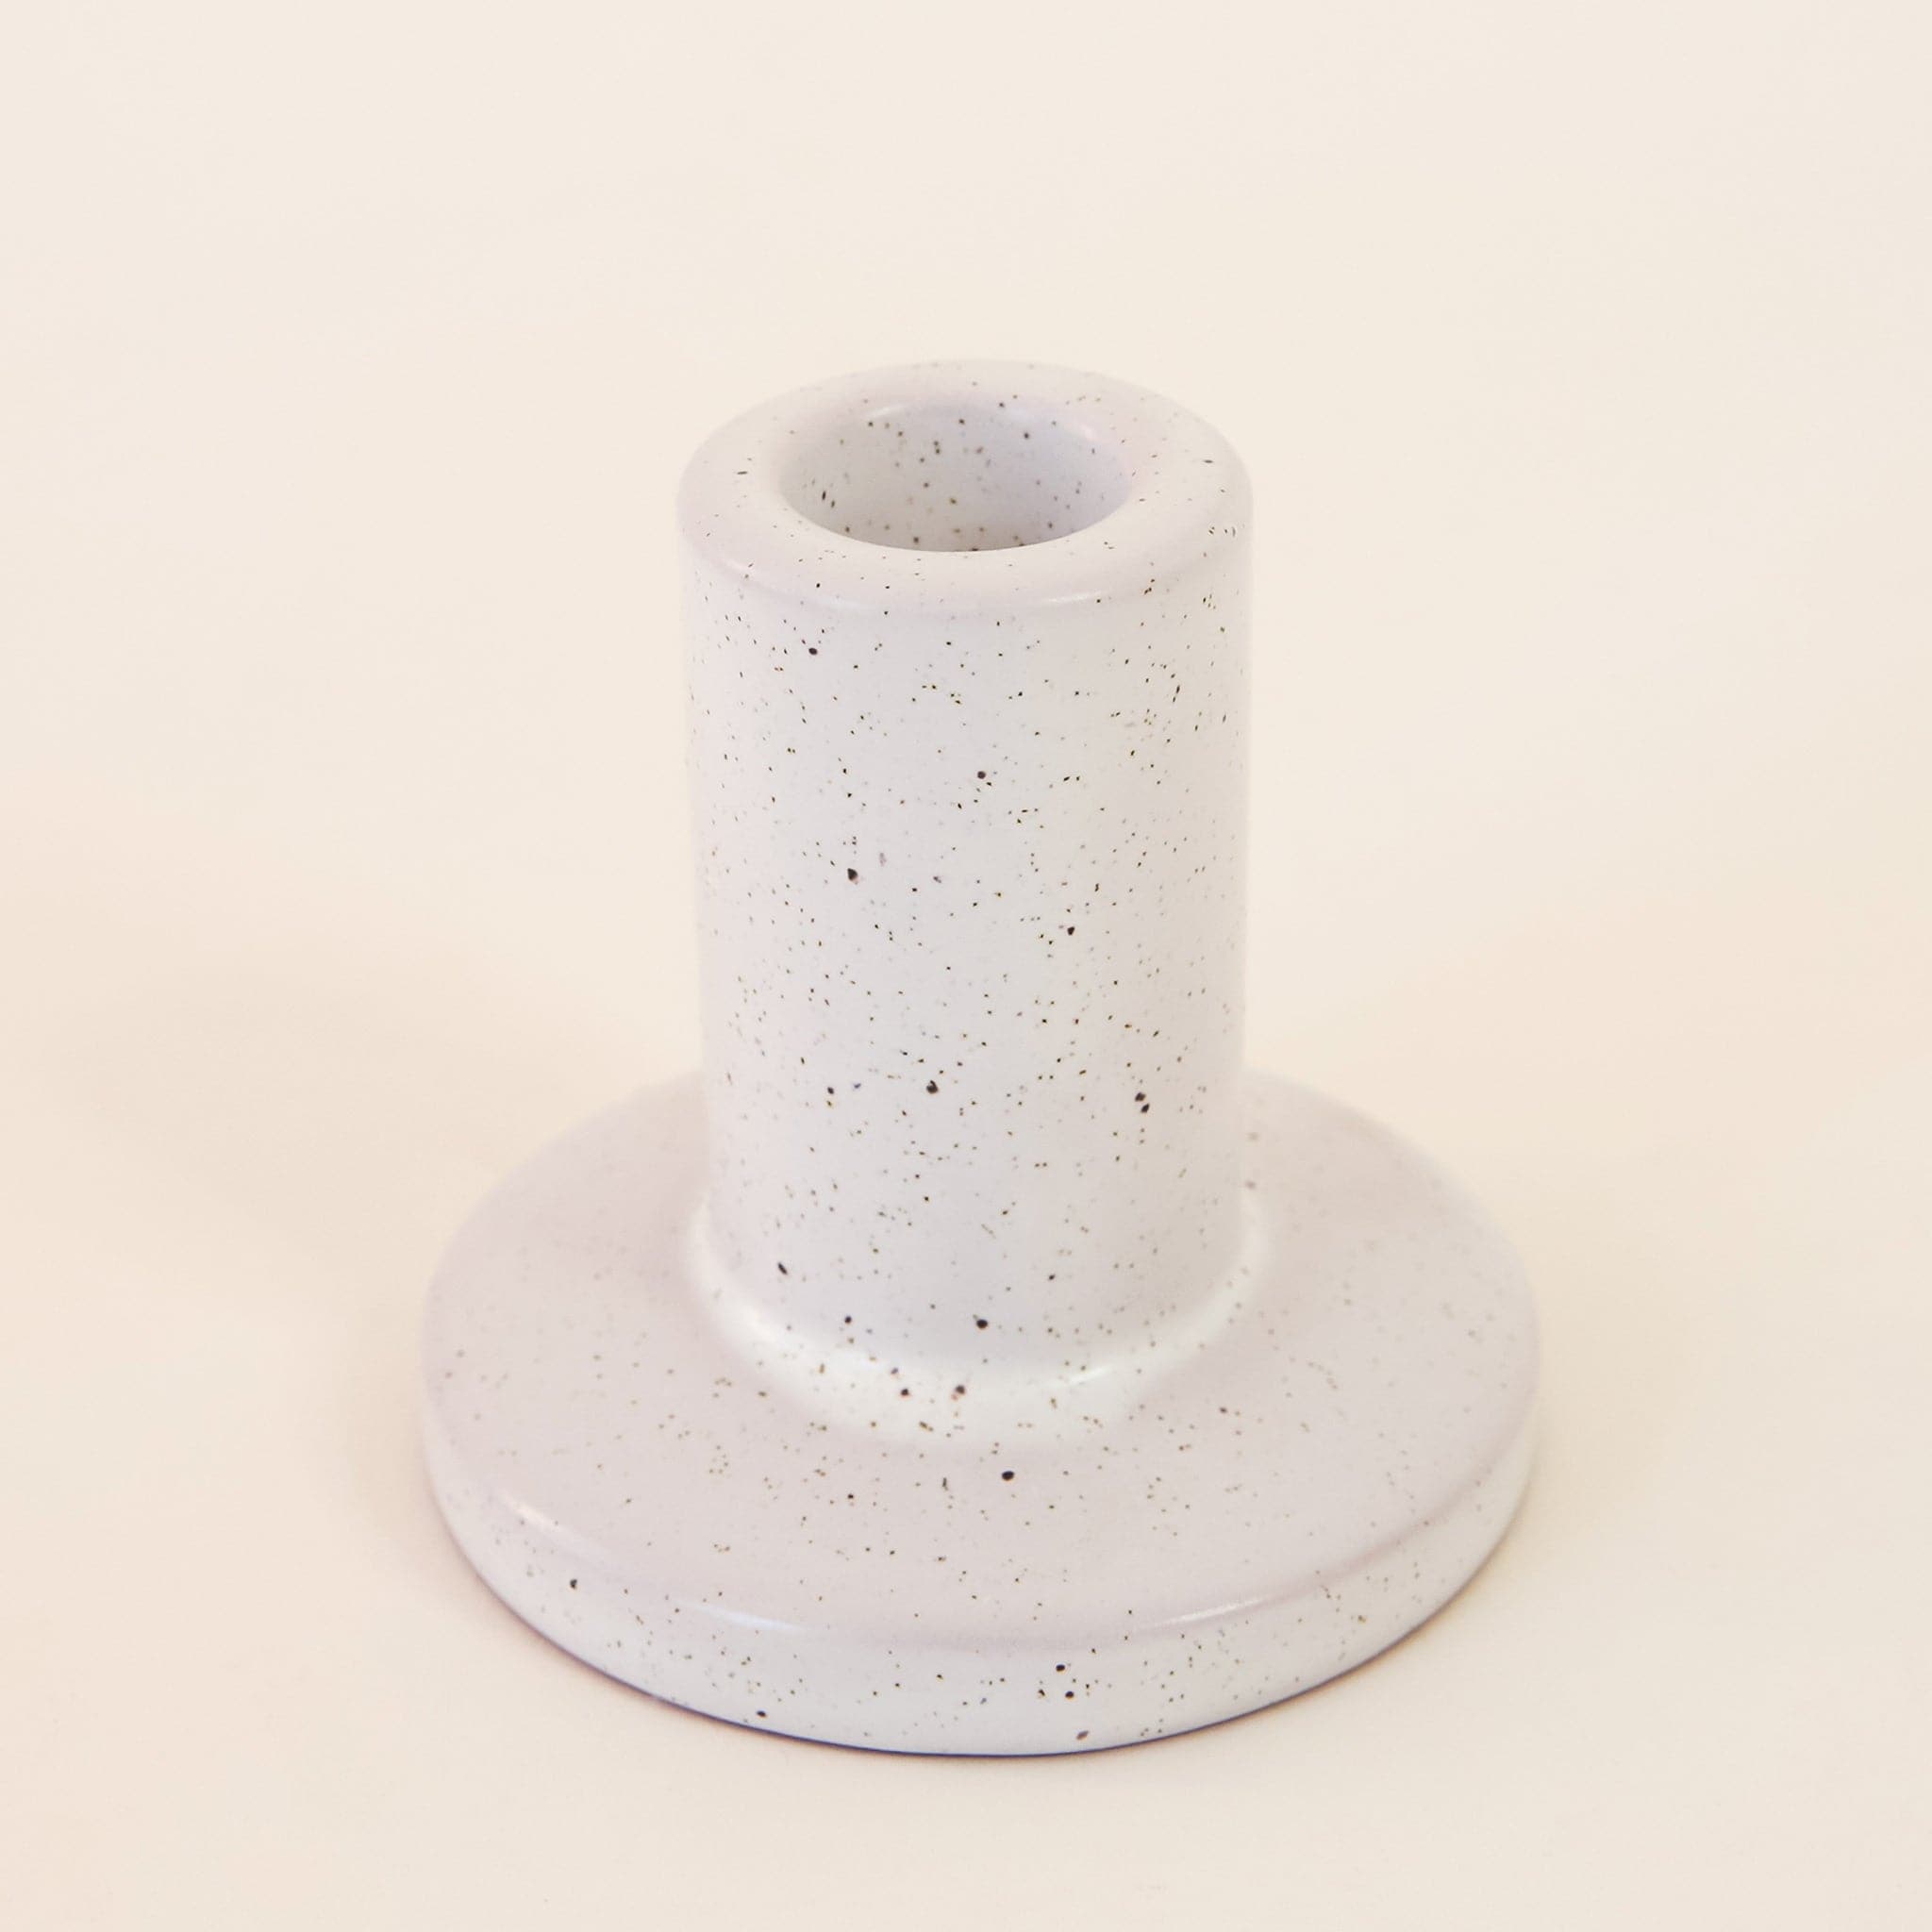 Against a white background is a gray, ceramic candle holder with black speckles on it. The base is round with a tall, cylinder top. 